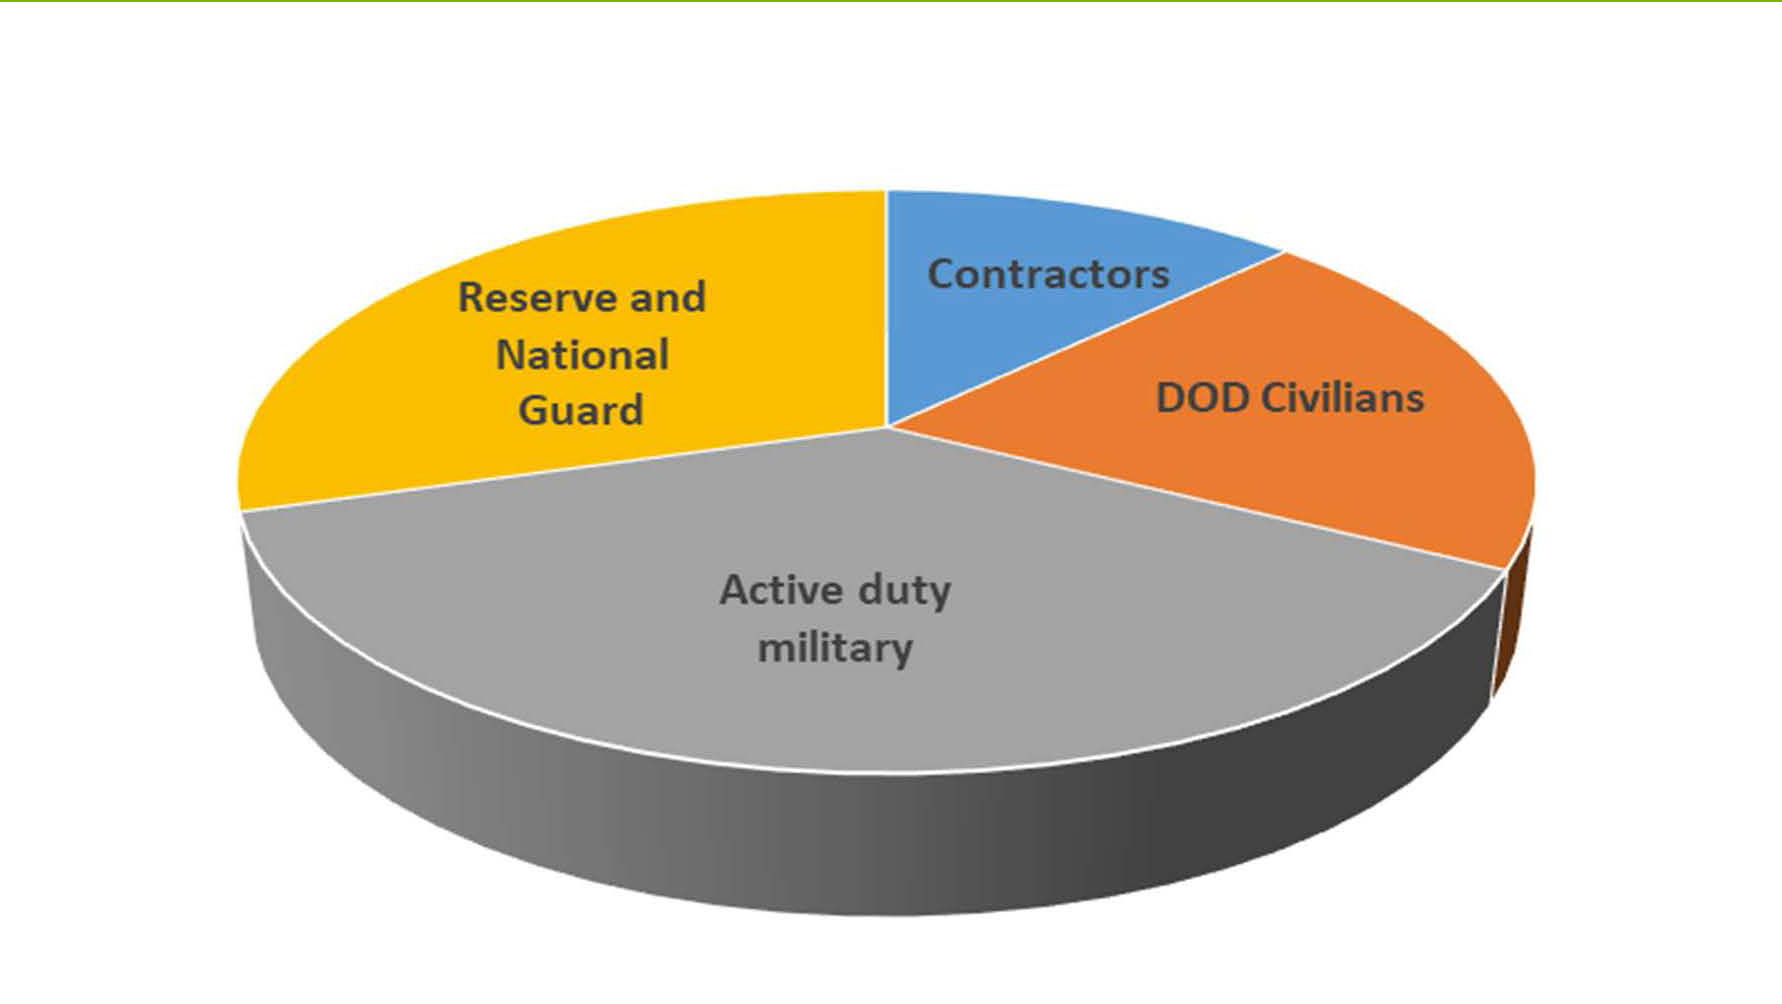 A pie chart featuring different military forces